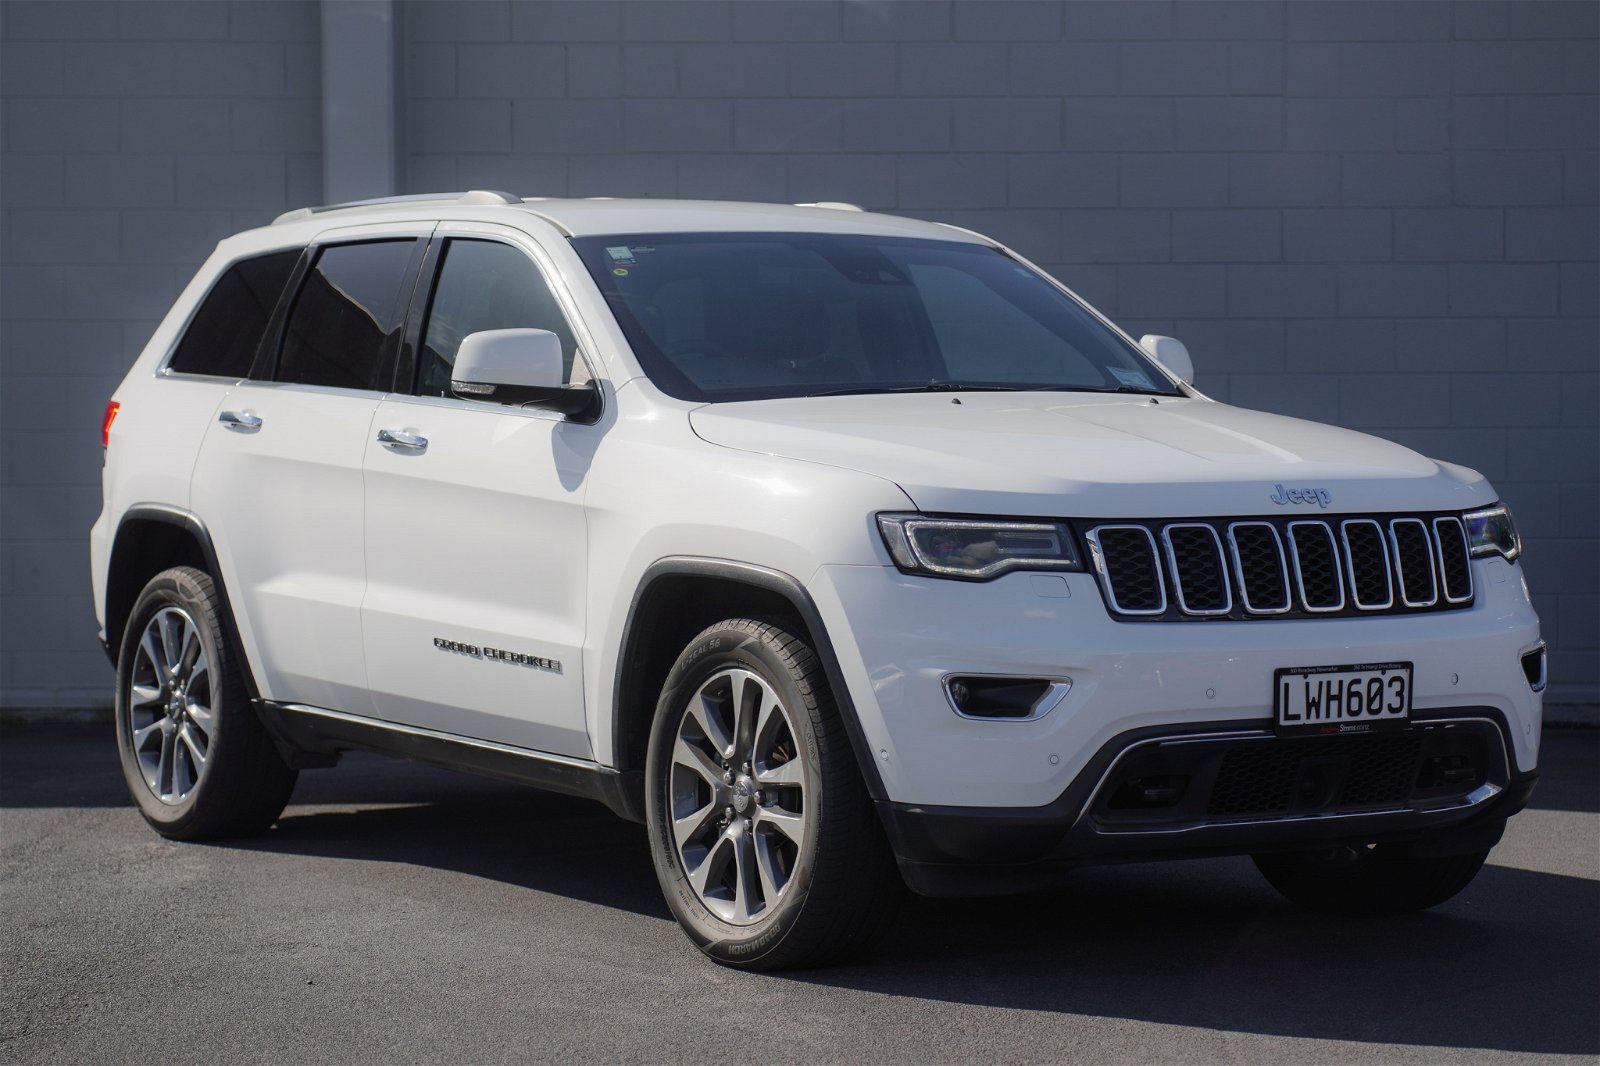 2018 Jeep Grand Cherokee Limited 3.6P 4WD 8A 5Dr Wagon